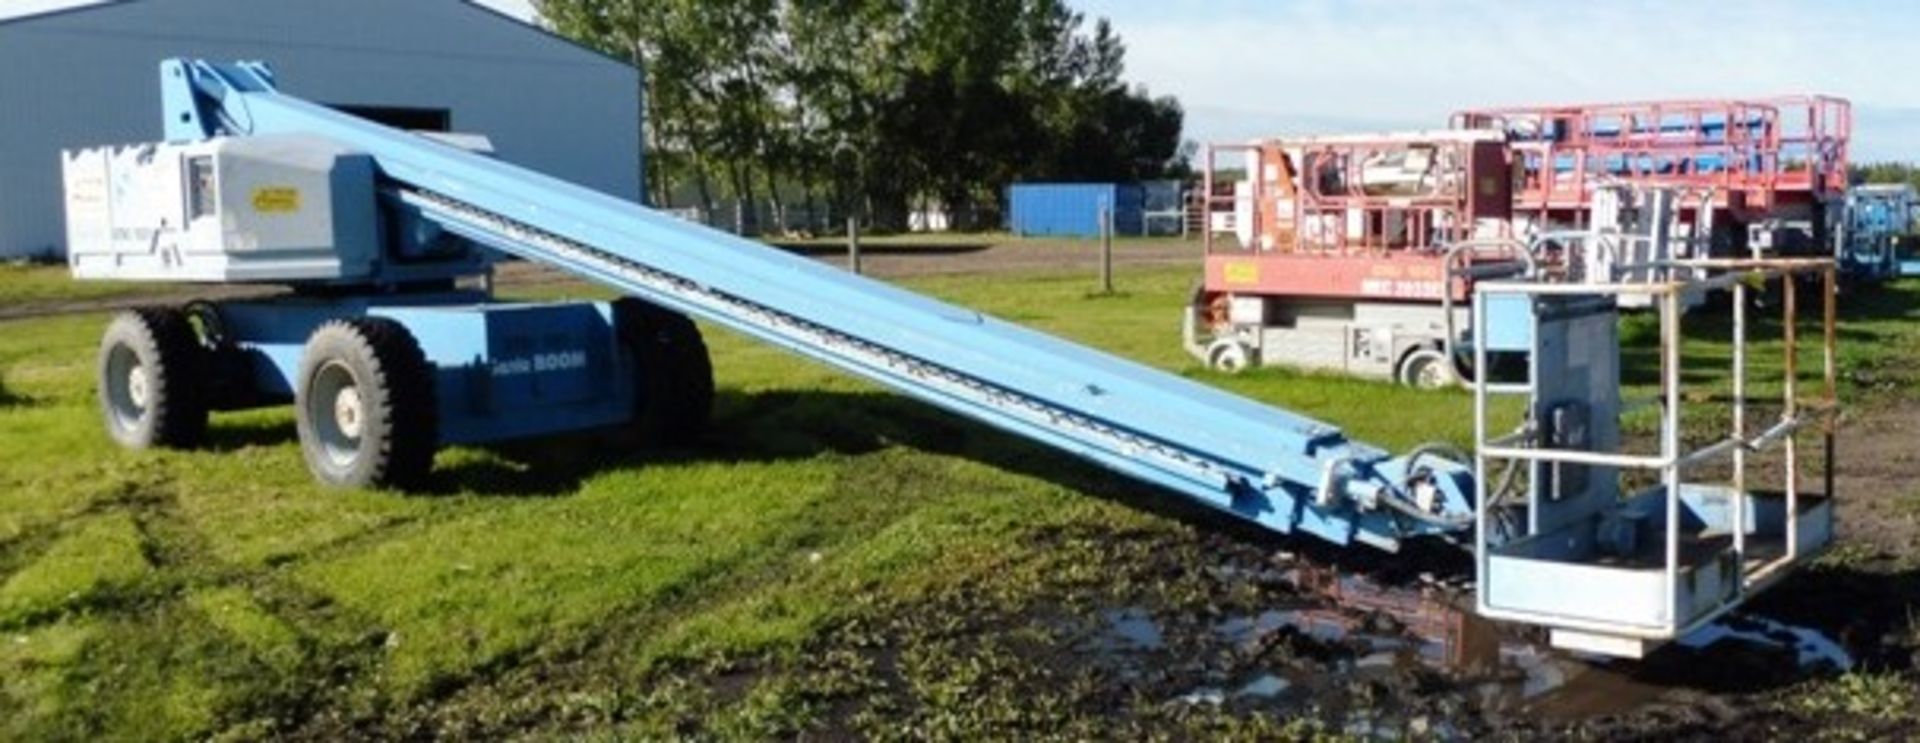 1995 GENIE S80-40 4WD ROUGH TERRAIN ARTICULATING BOOM - STRAIGHT BOOM MANLIFT - Image 2 of 6